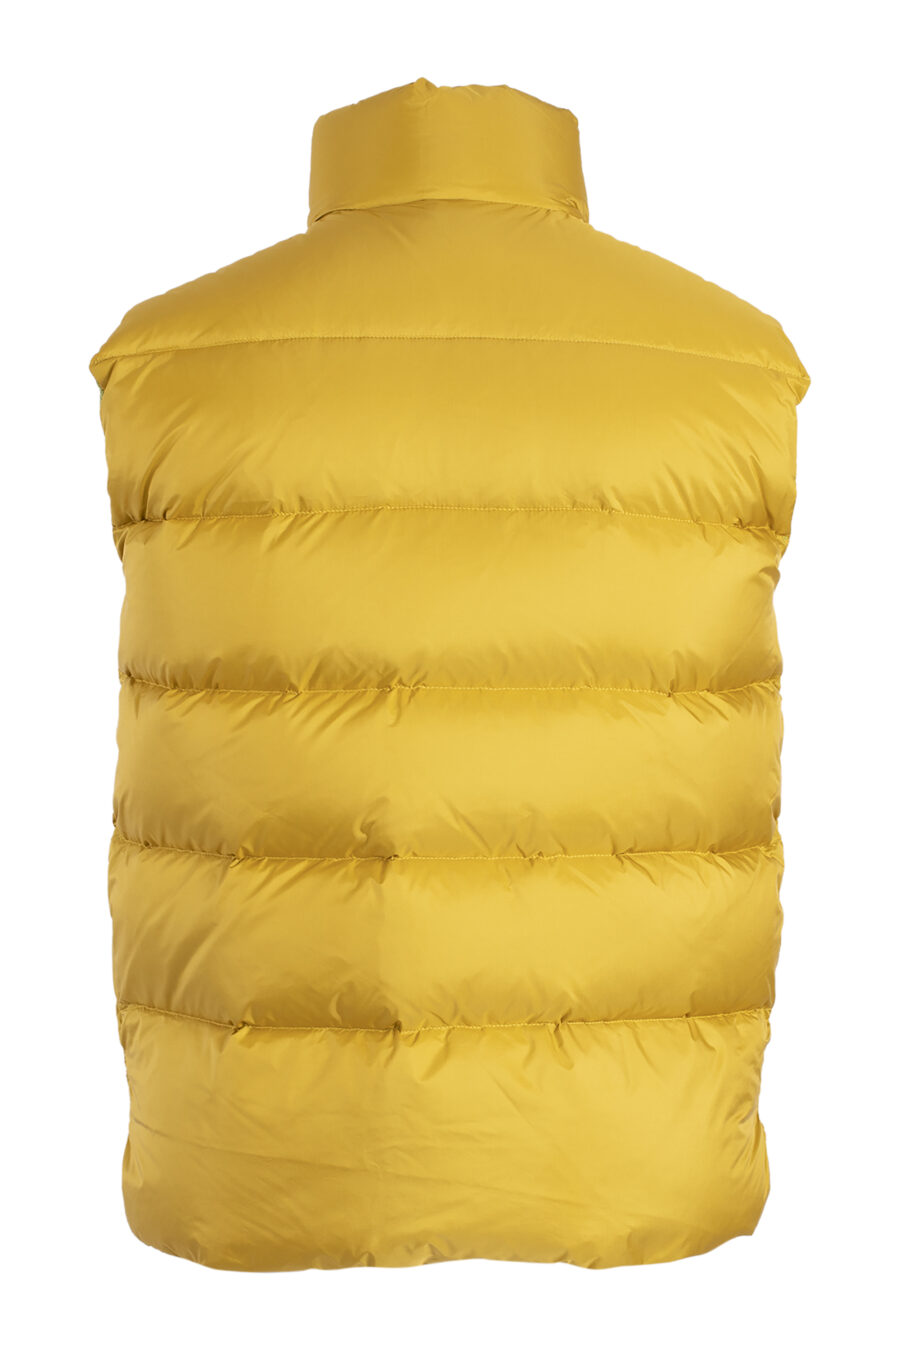 Yellow quilted waistcoat - IMG 4608